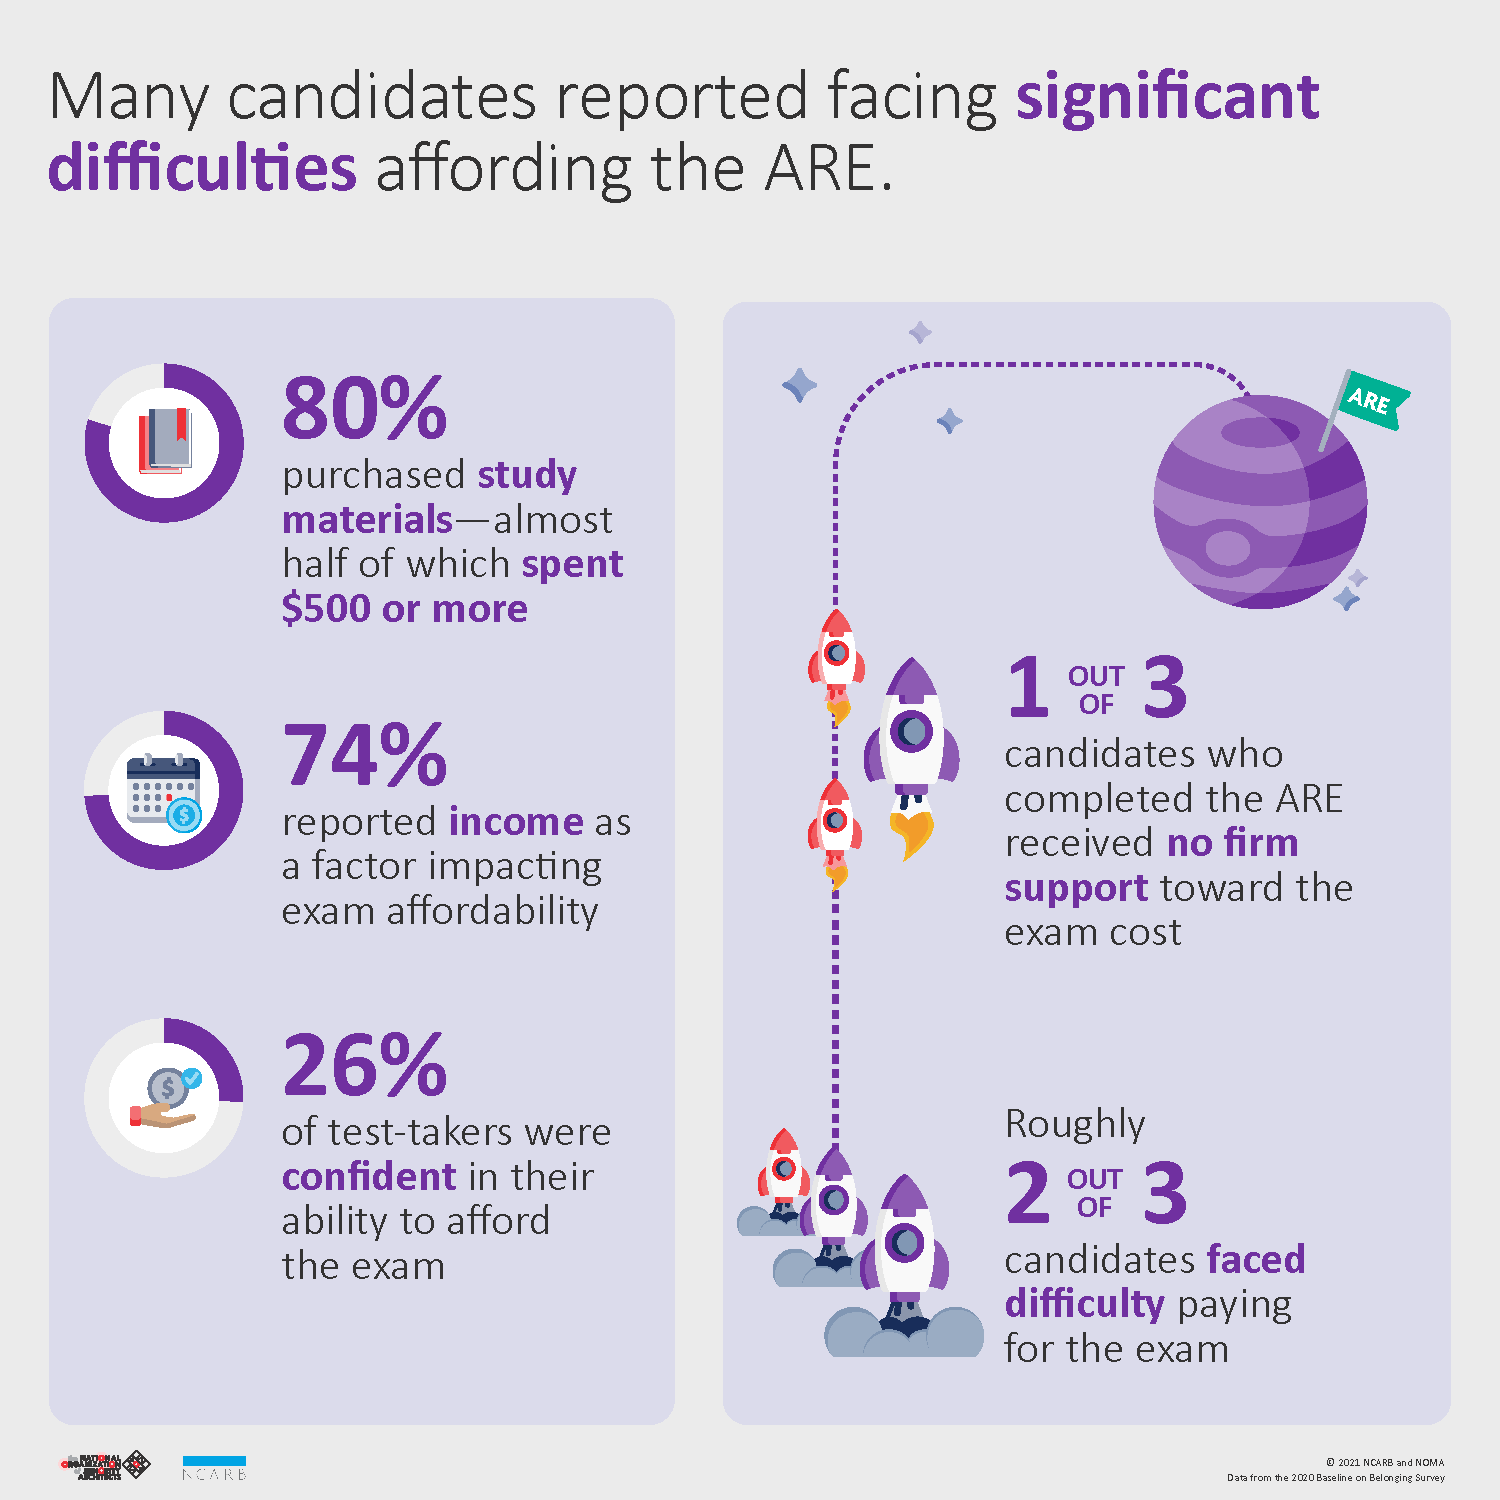 Examination report infographic showing statistics about candidates facing difficulties affording the ARE